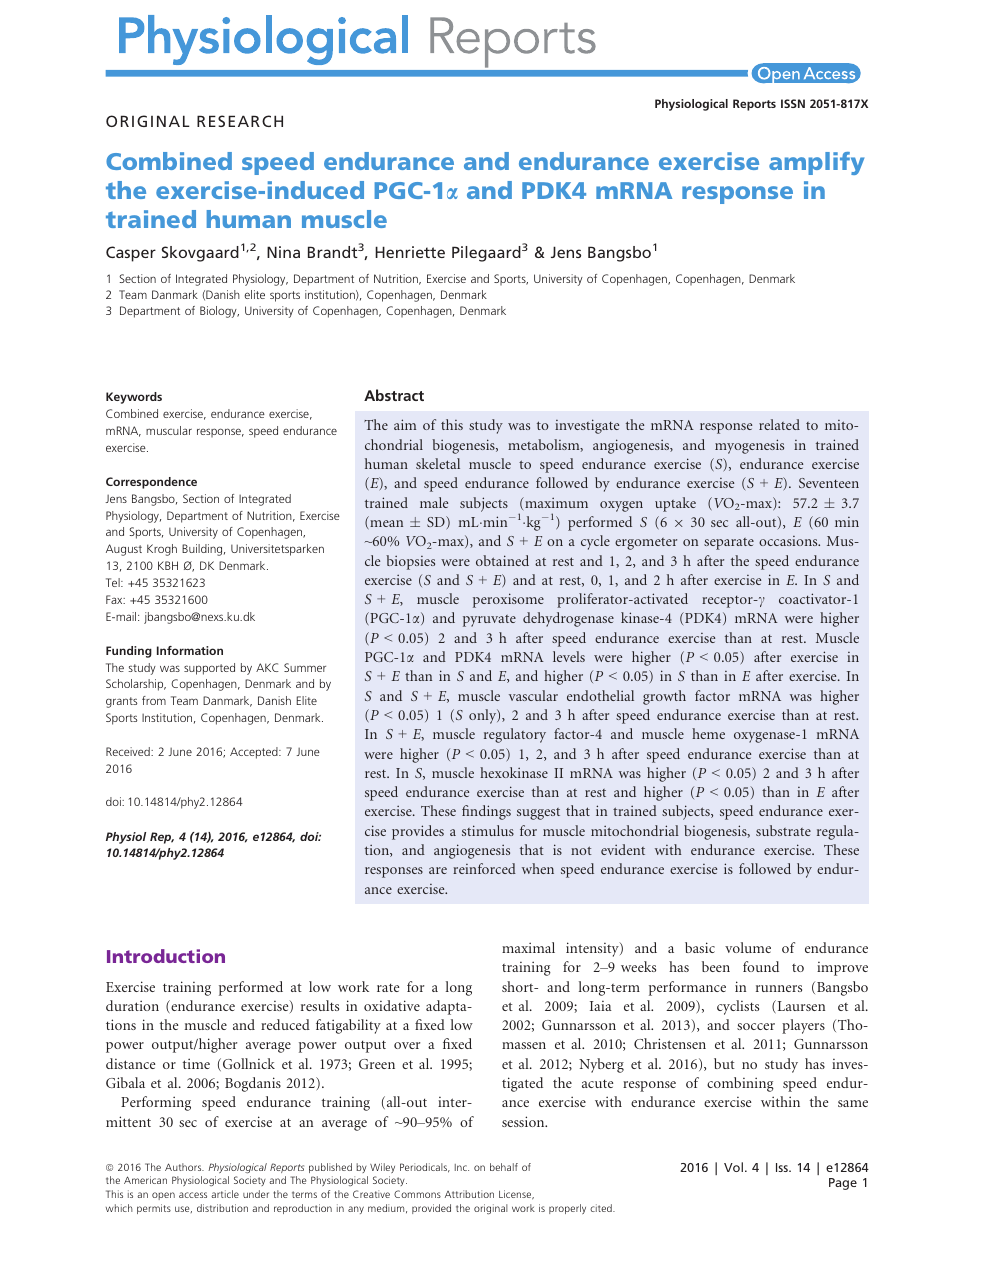 speed endurance and endurance exercise amplify the exercise‐induced PGC‐1αand PDK4 mRNA response in trained human muscle – topic of research paper in Biological sciences. Download scholarly article PDF and read for